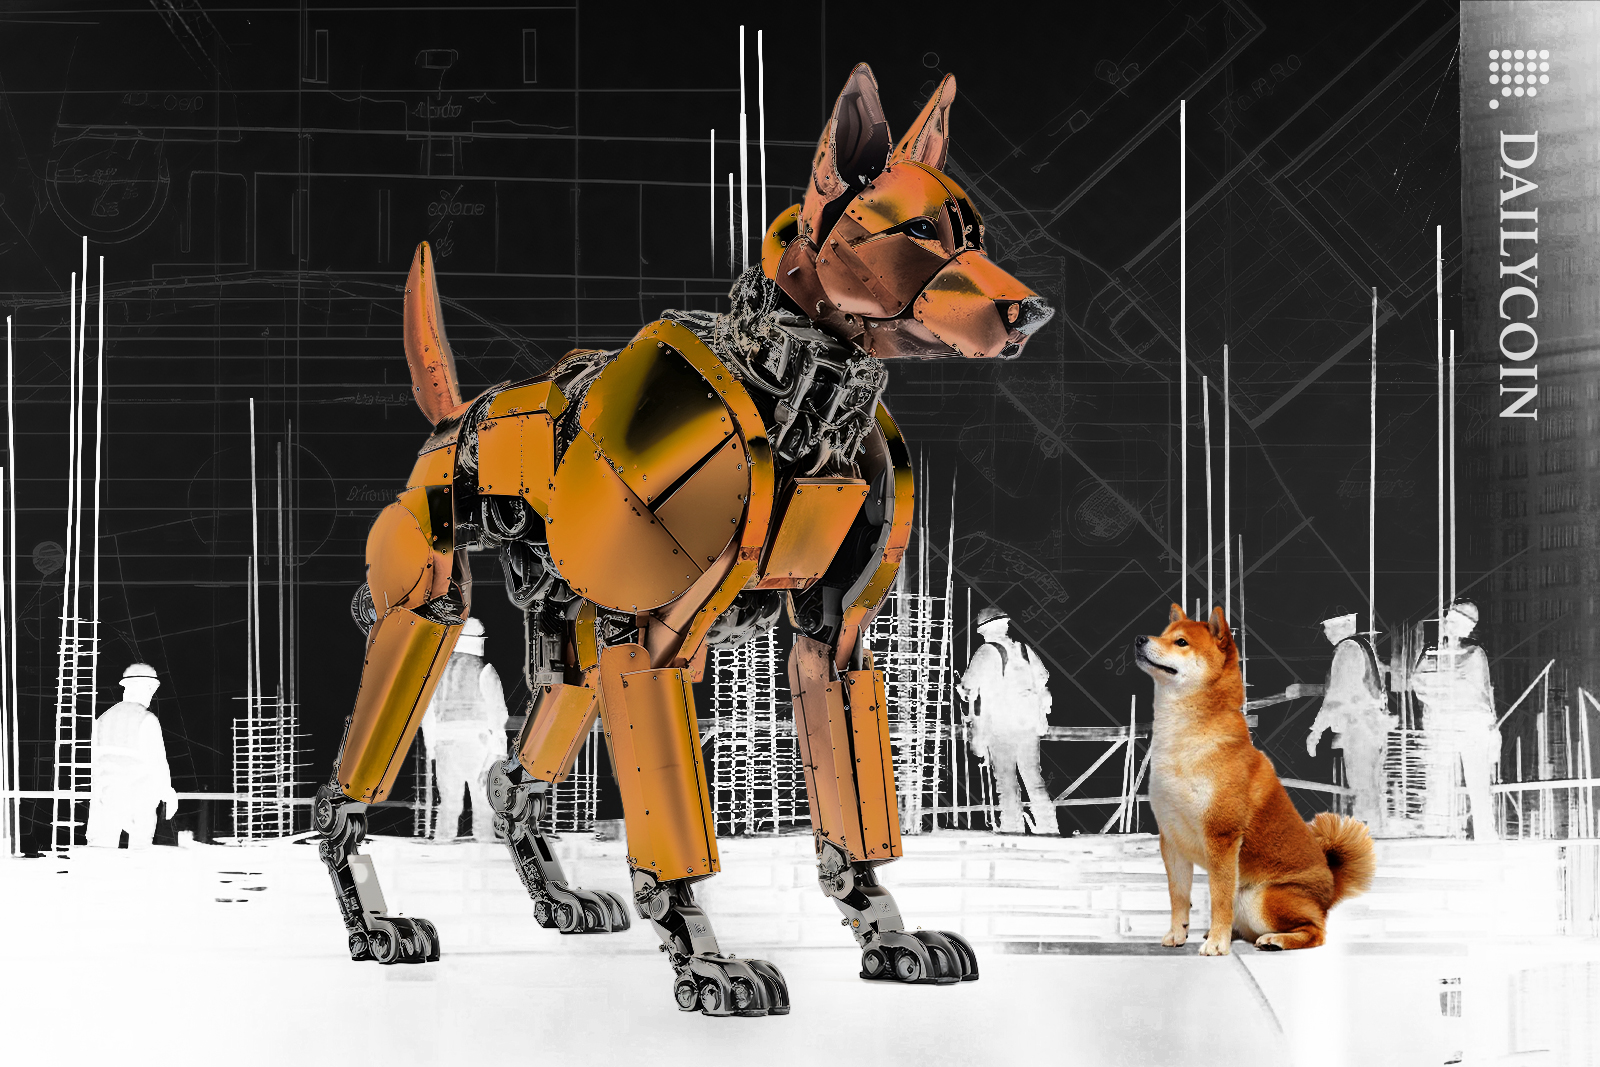 Big robot dog on a building blueprint, shiba inu looking up at it.